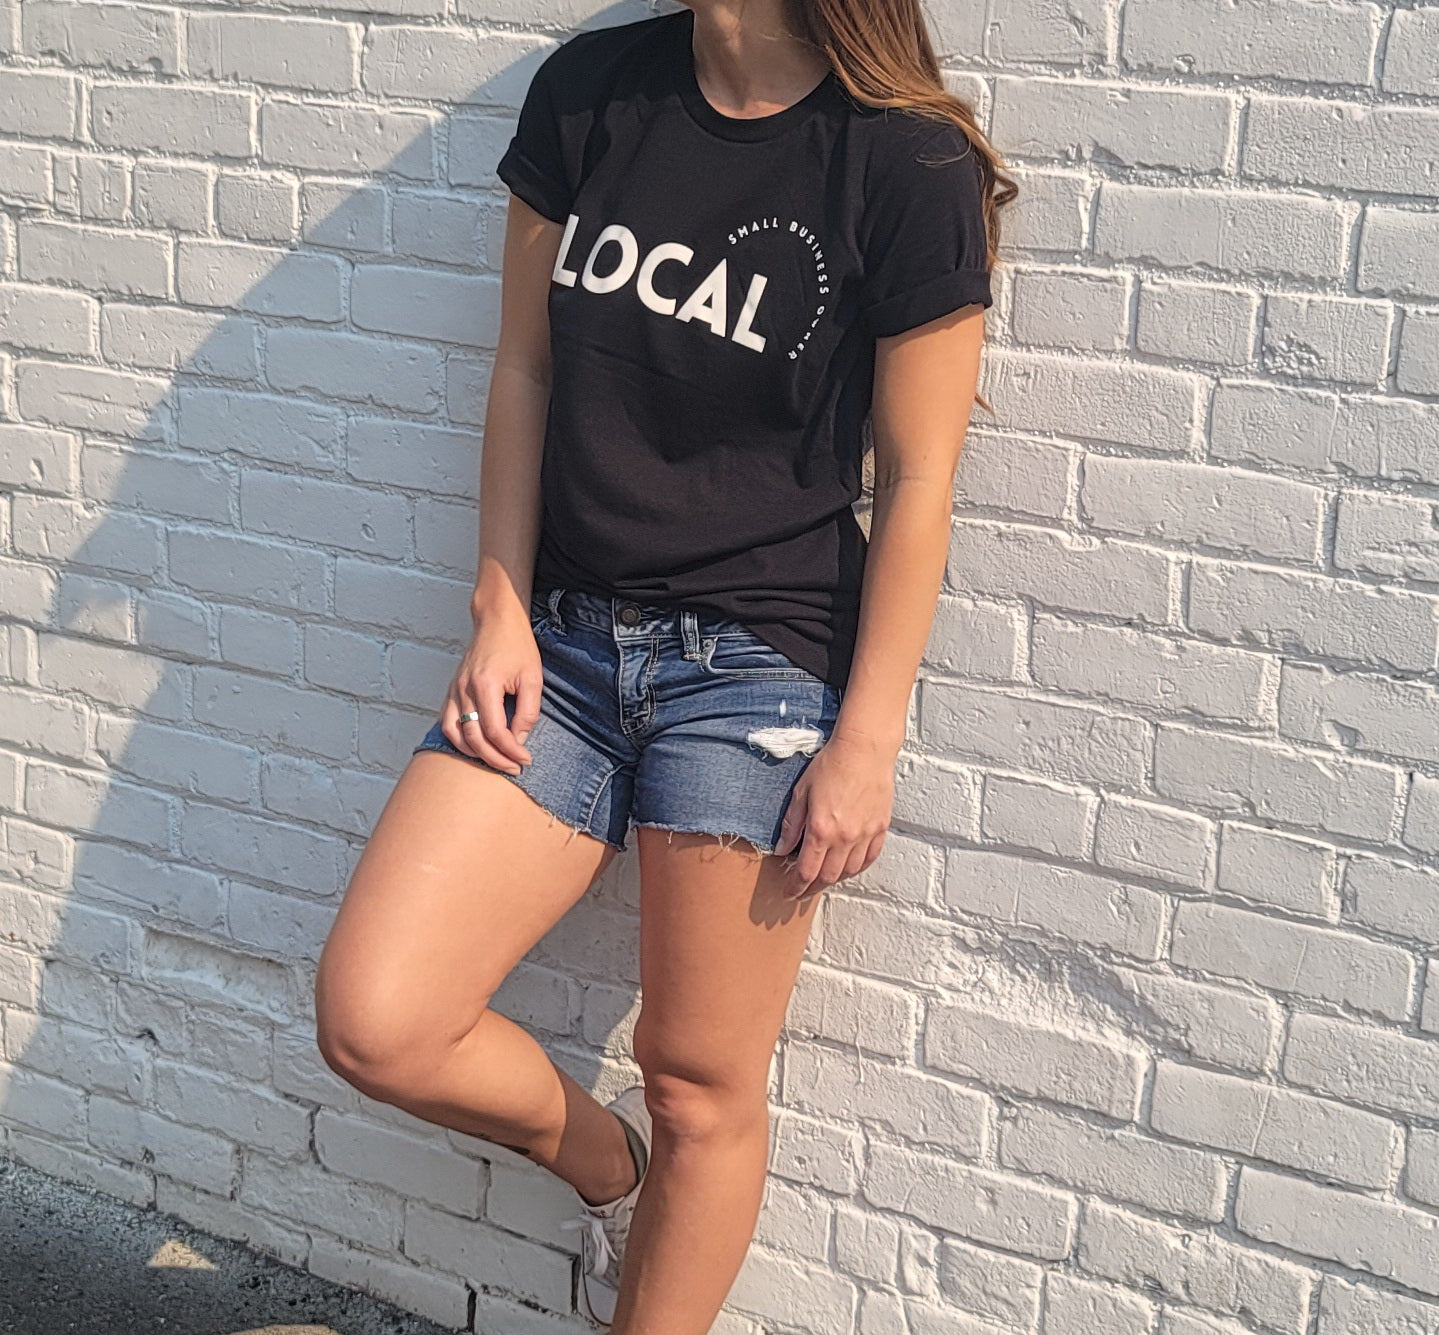 LOCAL SMALL BUSINESS OWNER T-SHIRT - LOCAL LABEL x REPUBLIC WEST COLLAB - BLACK